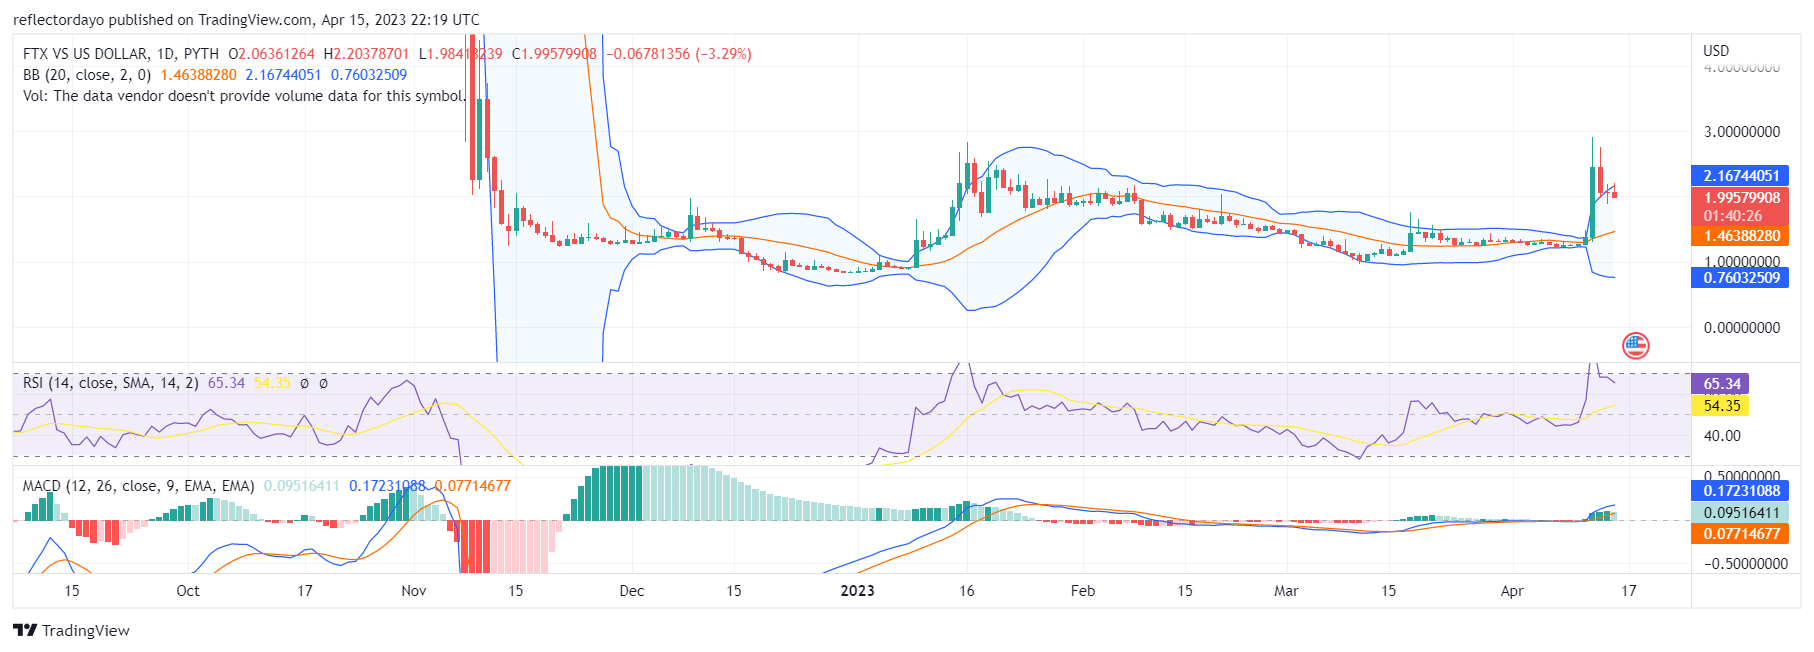 Top Trending Coins for Today, April 15: ARB, ID, BTC, FTT, and SHIB